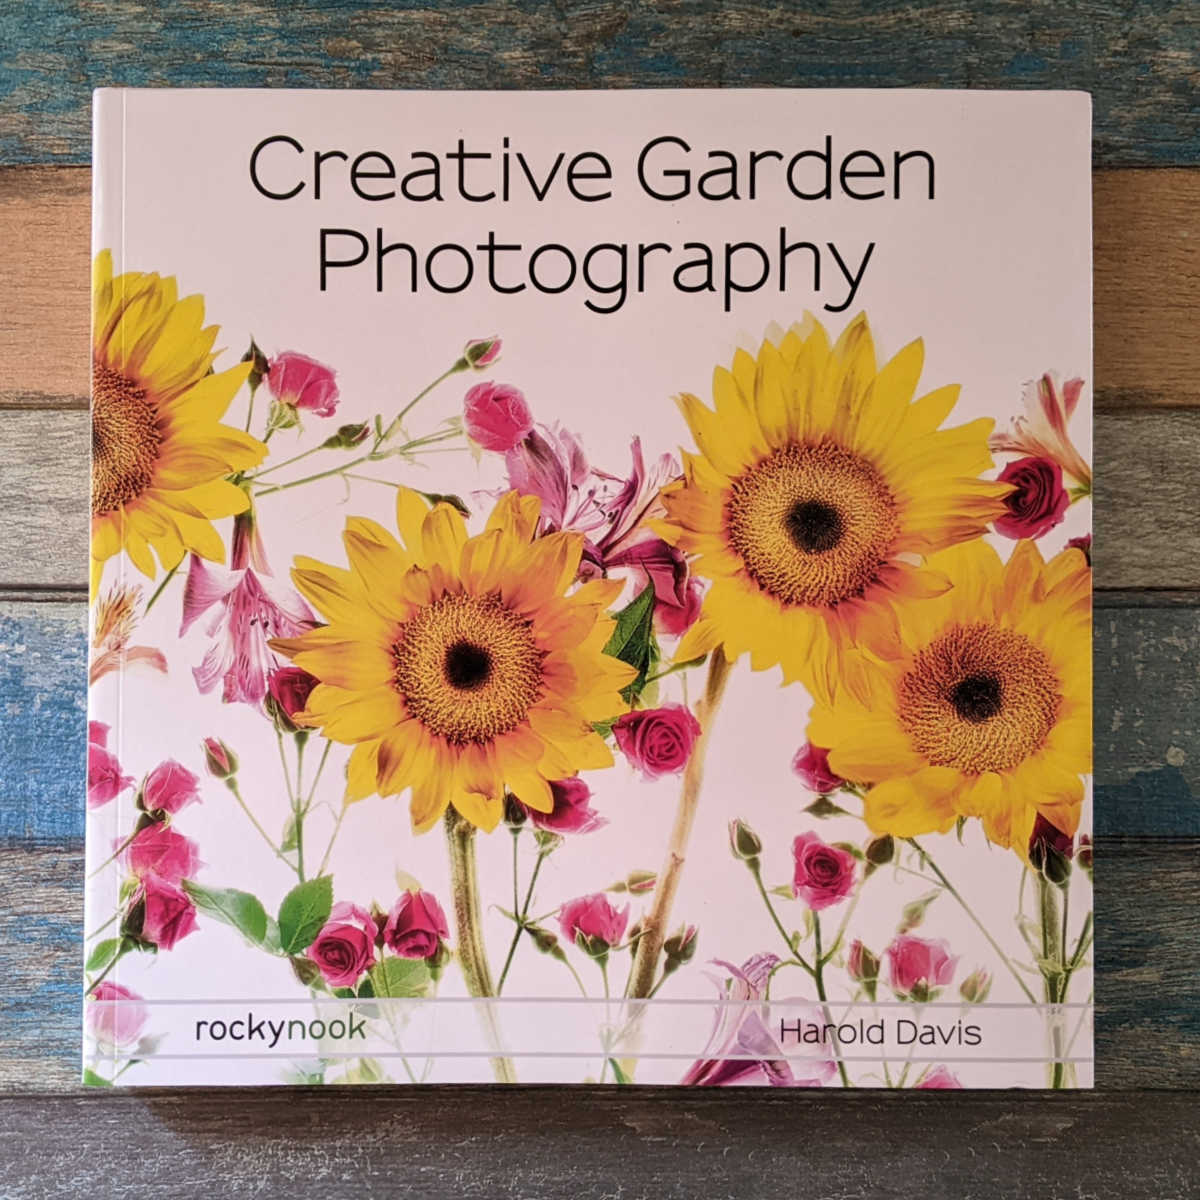 Get the Creative Garden Photography book, so you can learn how to take stunning photos of flowers, gardens and landscapes. 